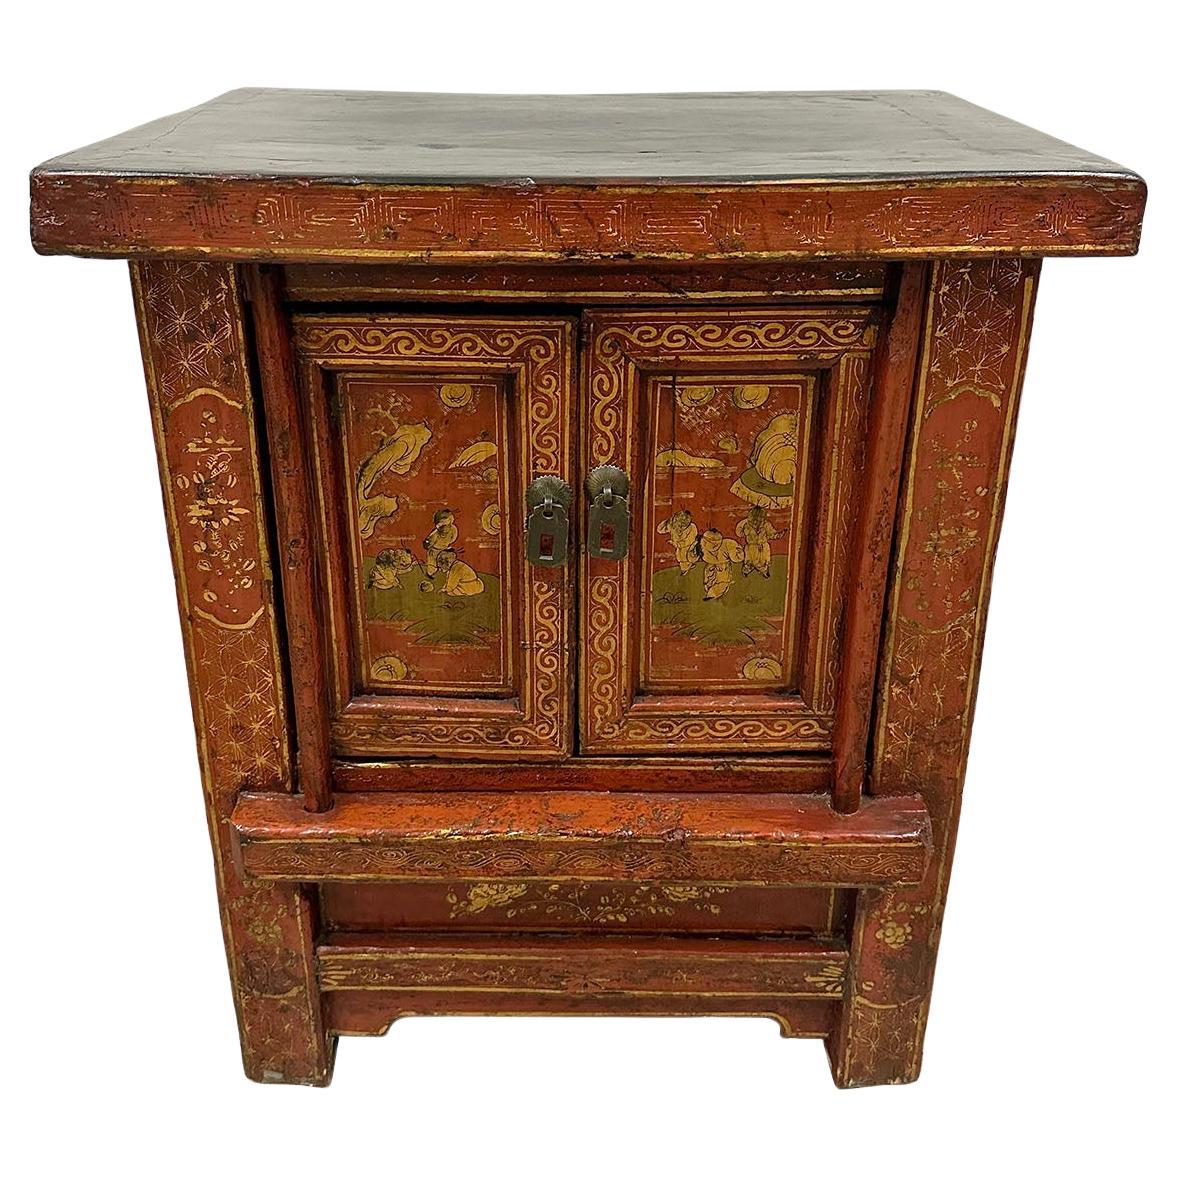 Chinese Late Qing Dynasty Bedside Wooden Cabinet with Period Painting Art Works